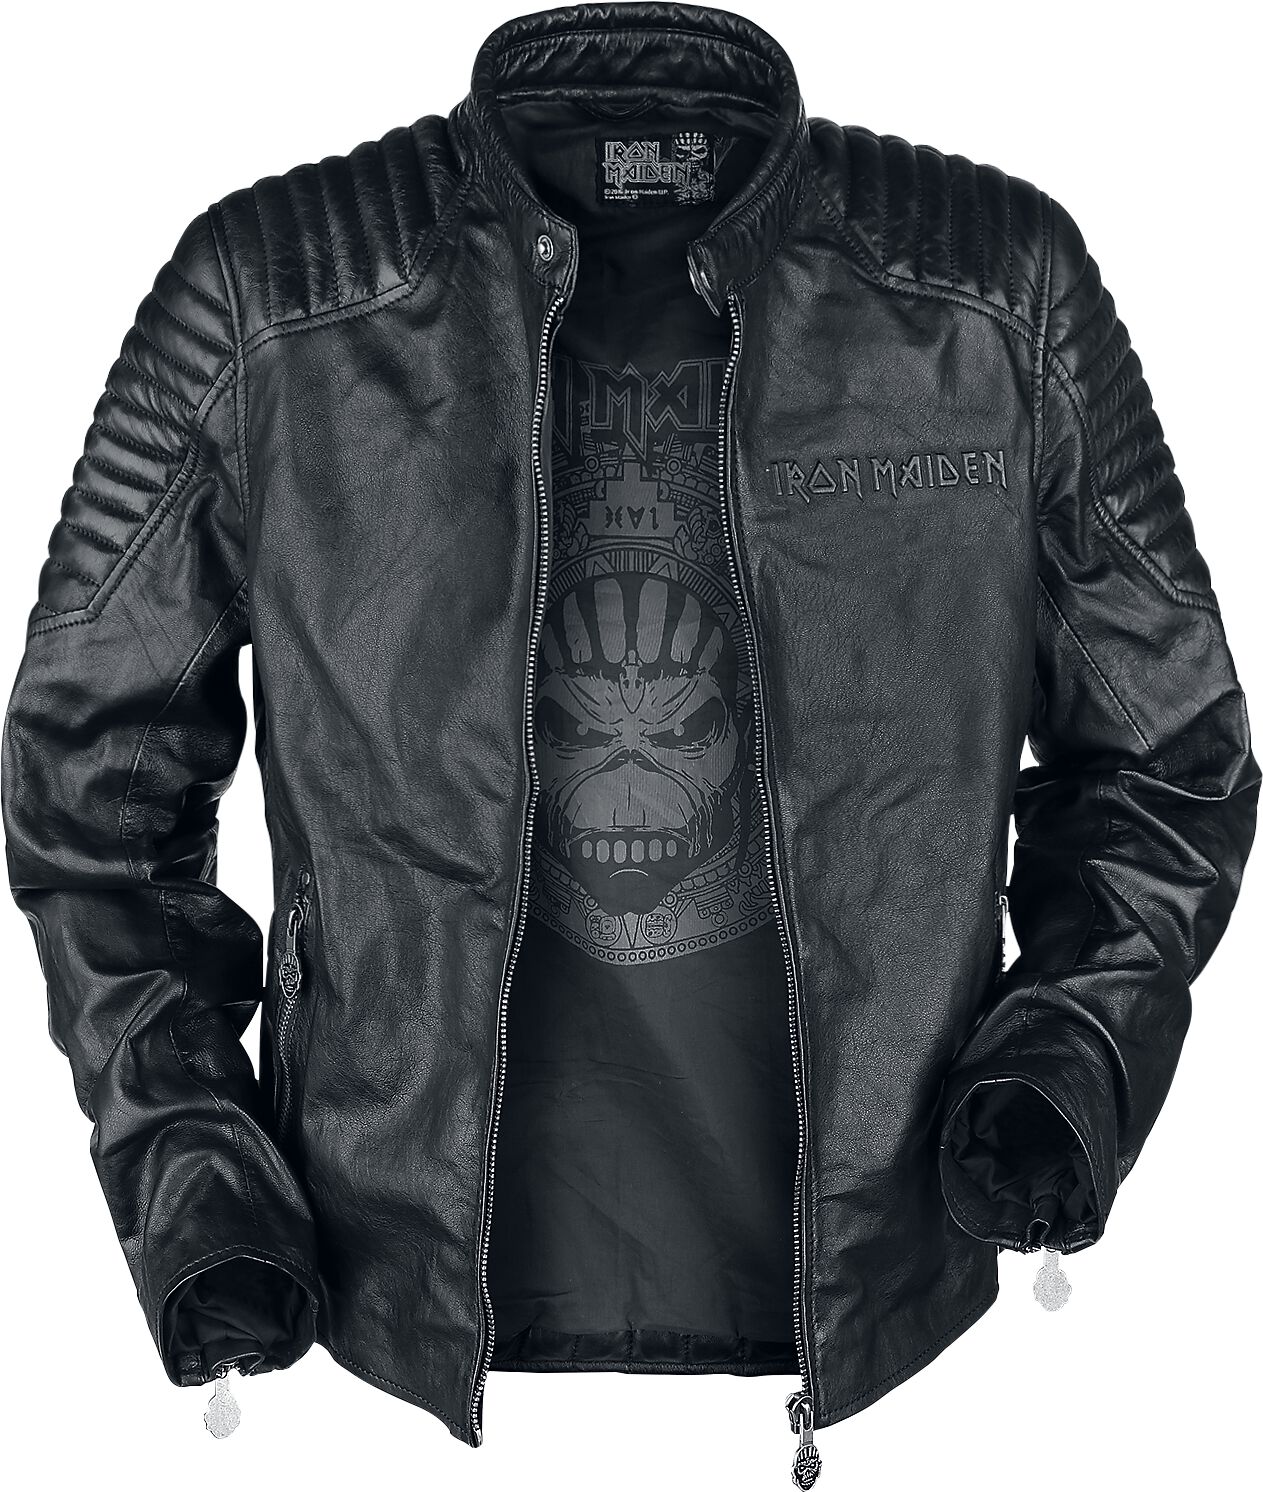 Leather Look Biker Jacket With Back Print